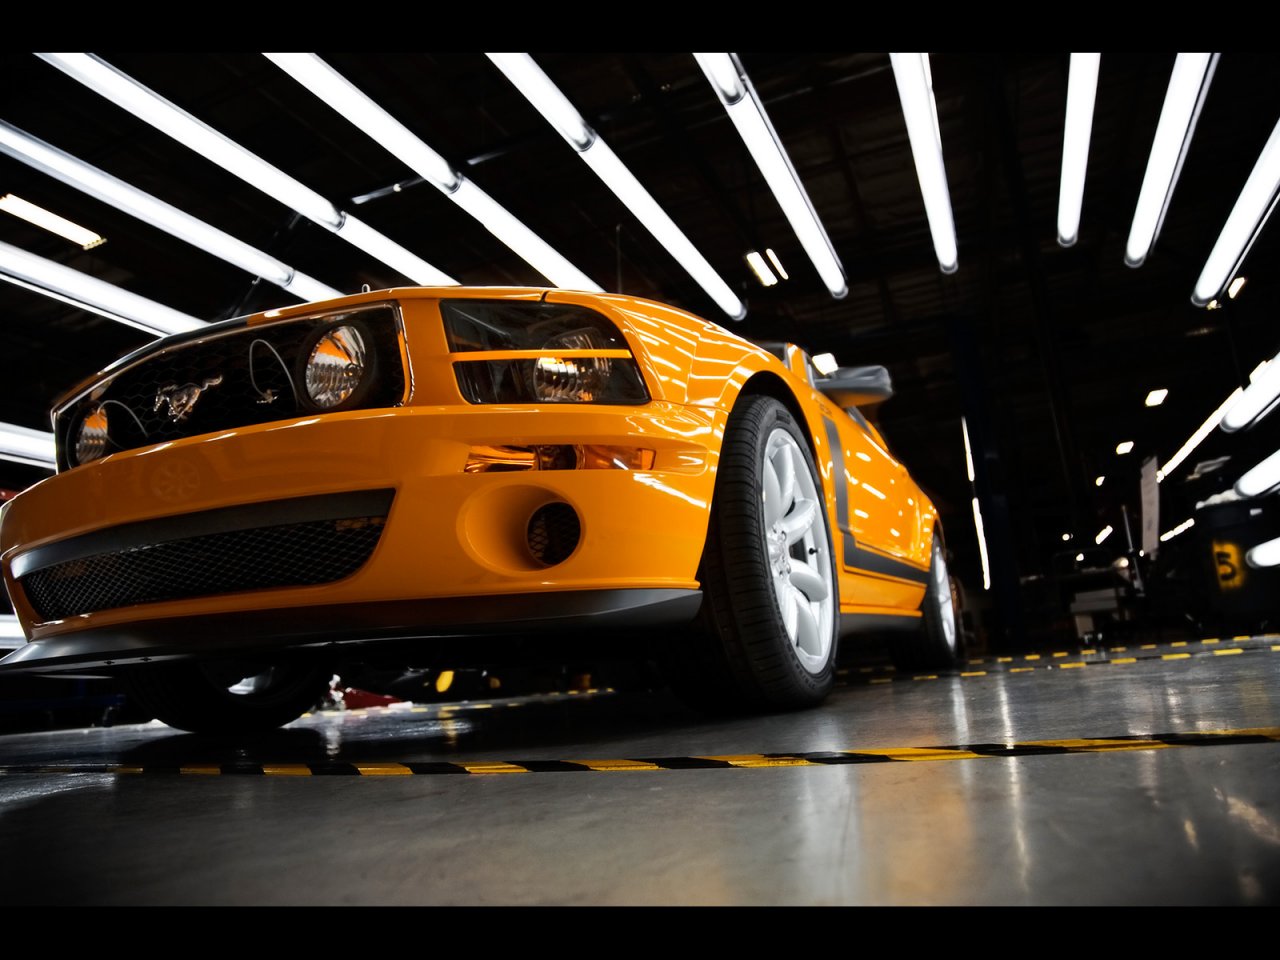 Foto: Saleen 302 Parnelli Jones Limited Edition Mustang Front Angle Bottom (2007)